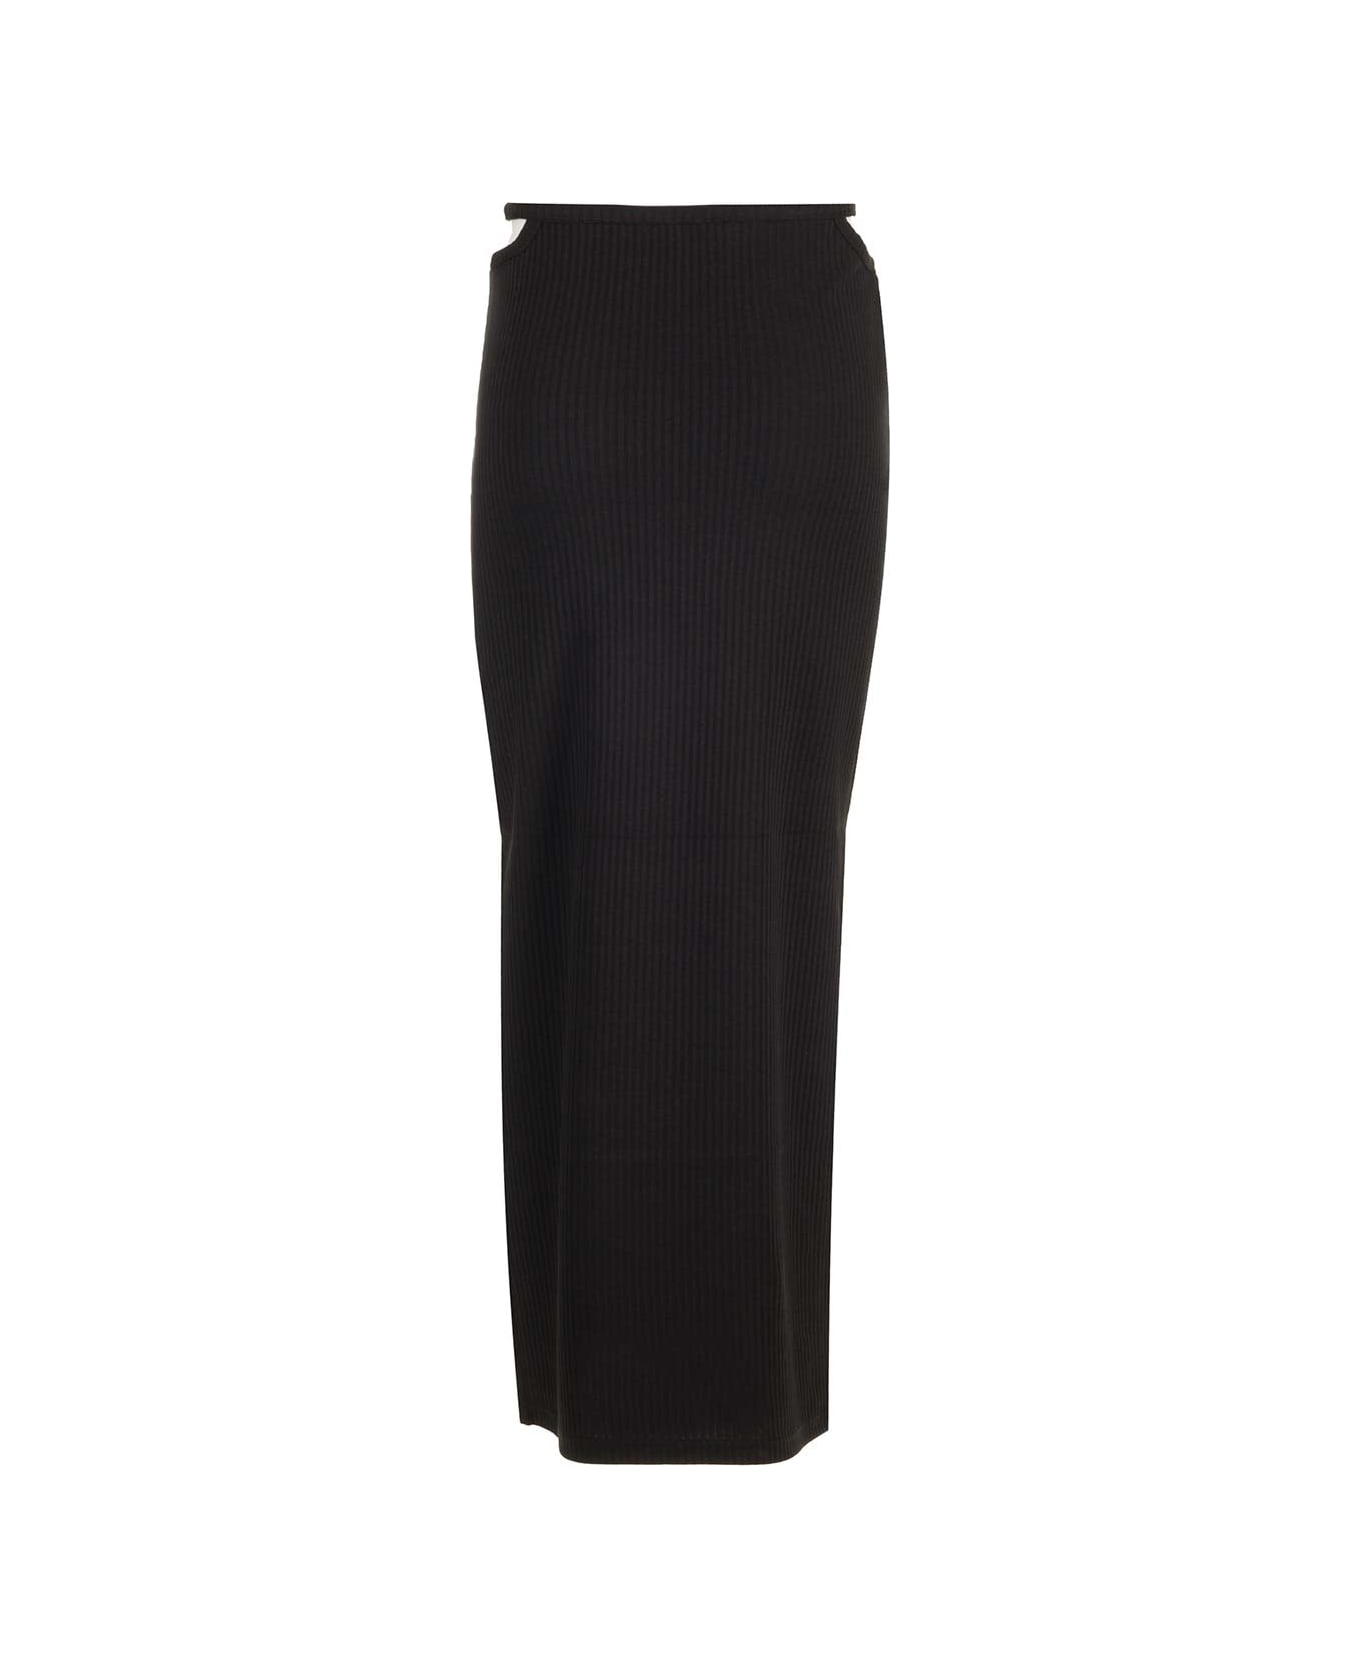 Alexander Wang Long Skirt In Ribbed Stretch Cotton - Black